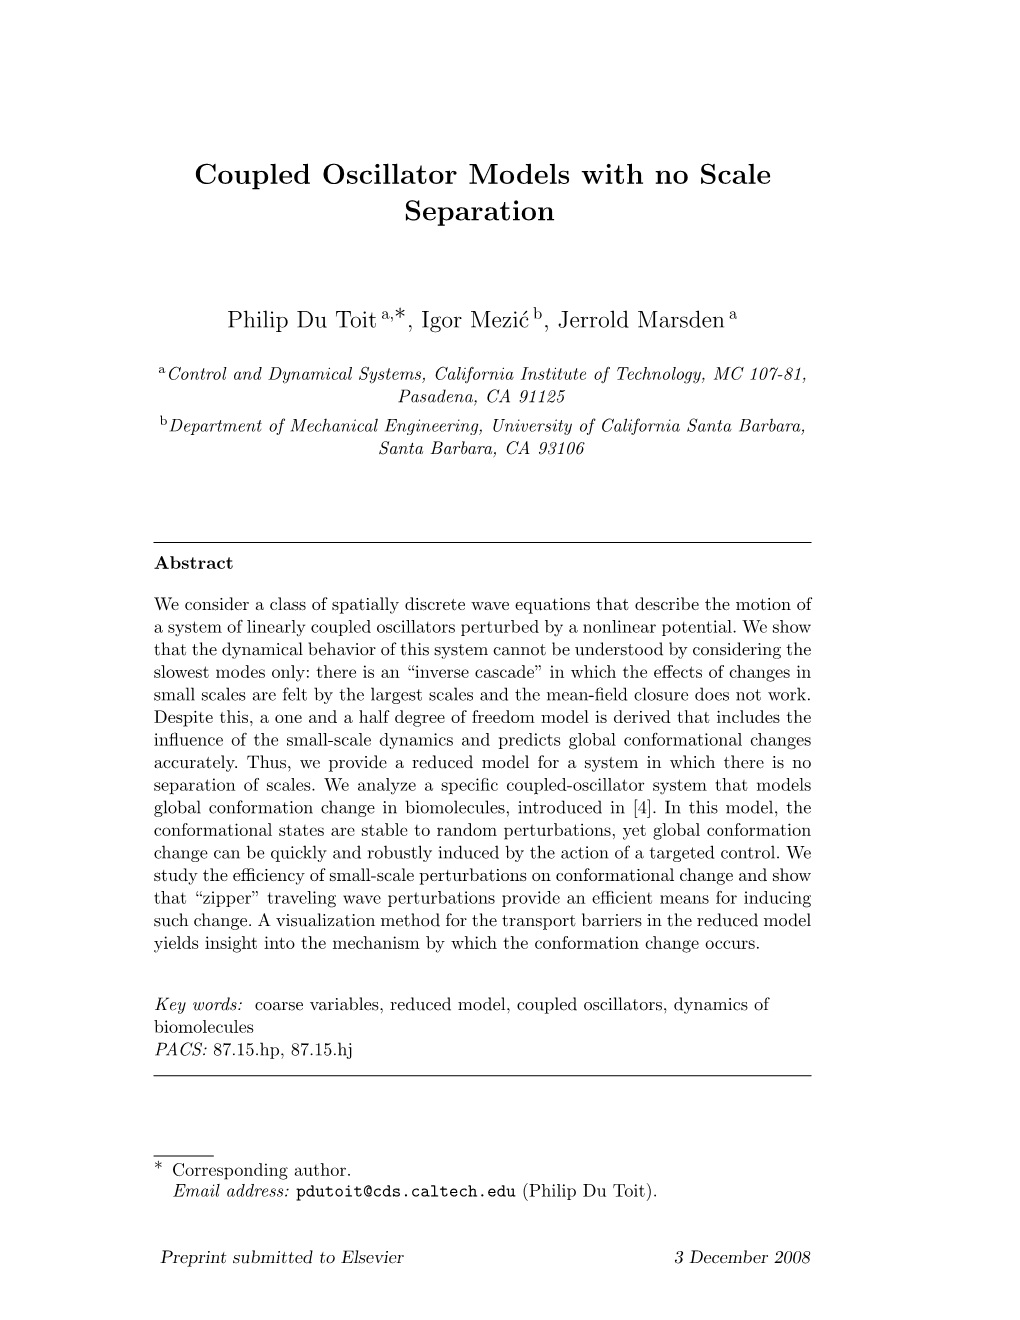 Coupled Oscillator Models with No Scale Separation